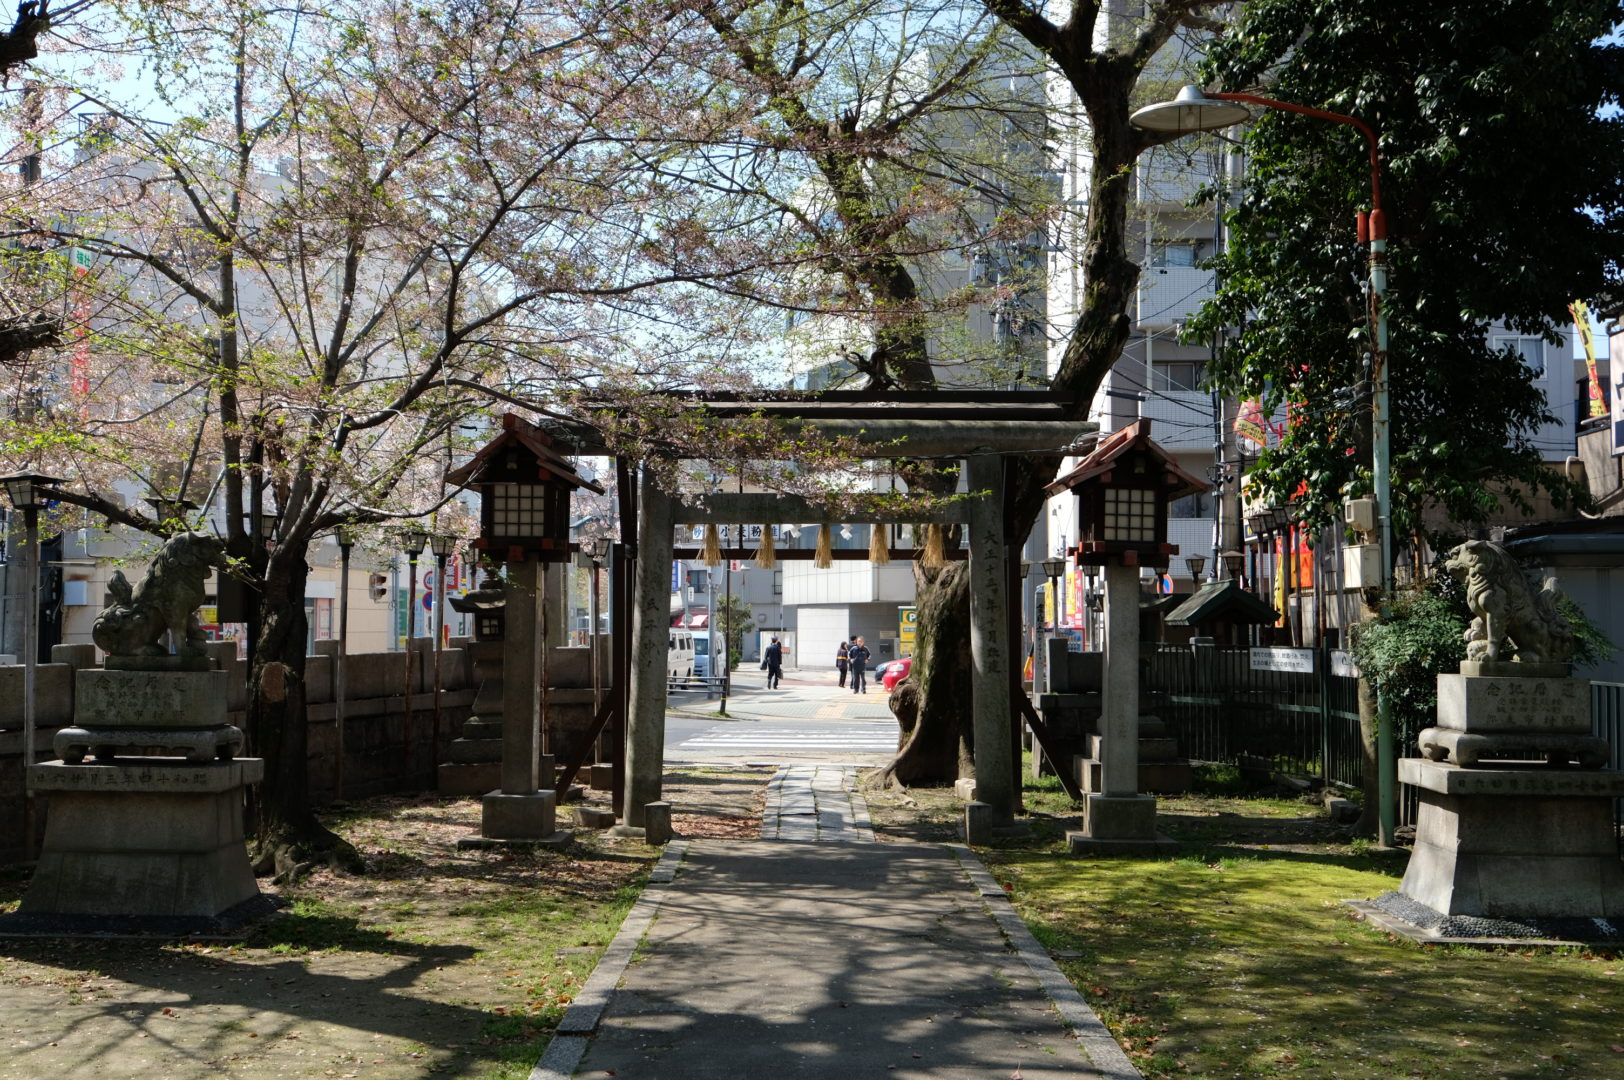 A street is framed by a gate that is the entrance of a shrine in downtown Nagoya, Japan.